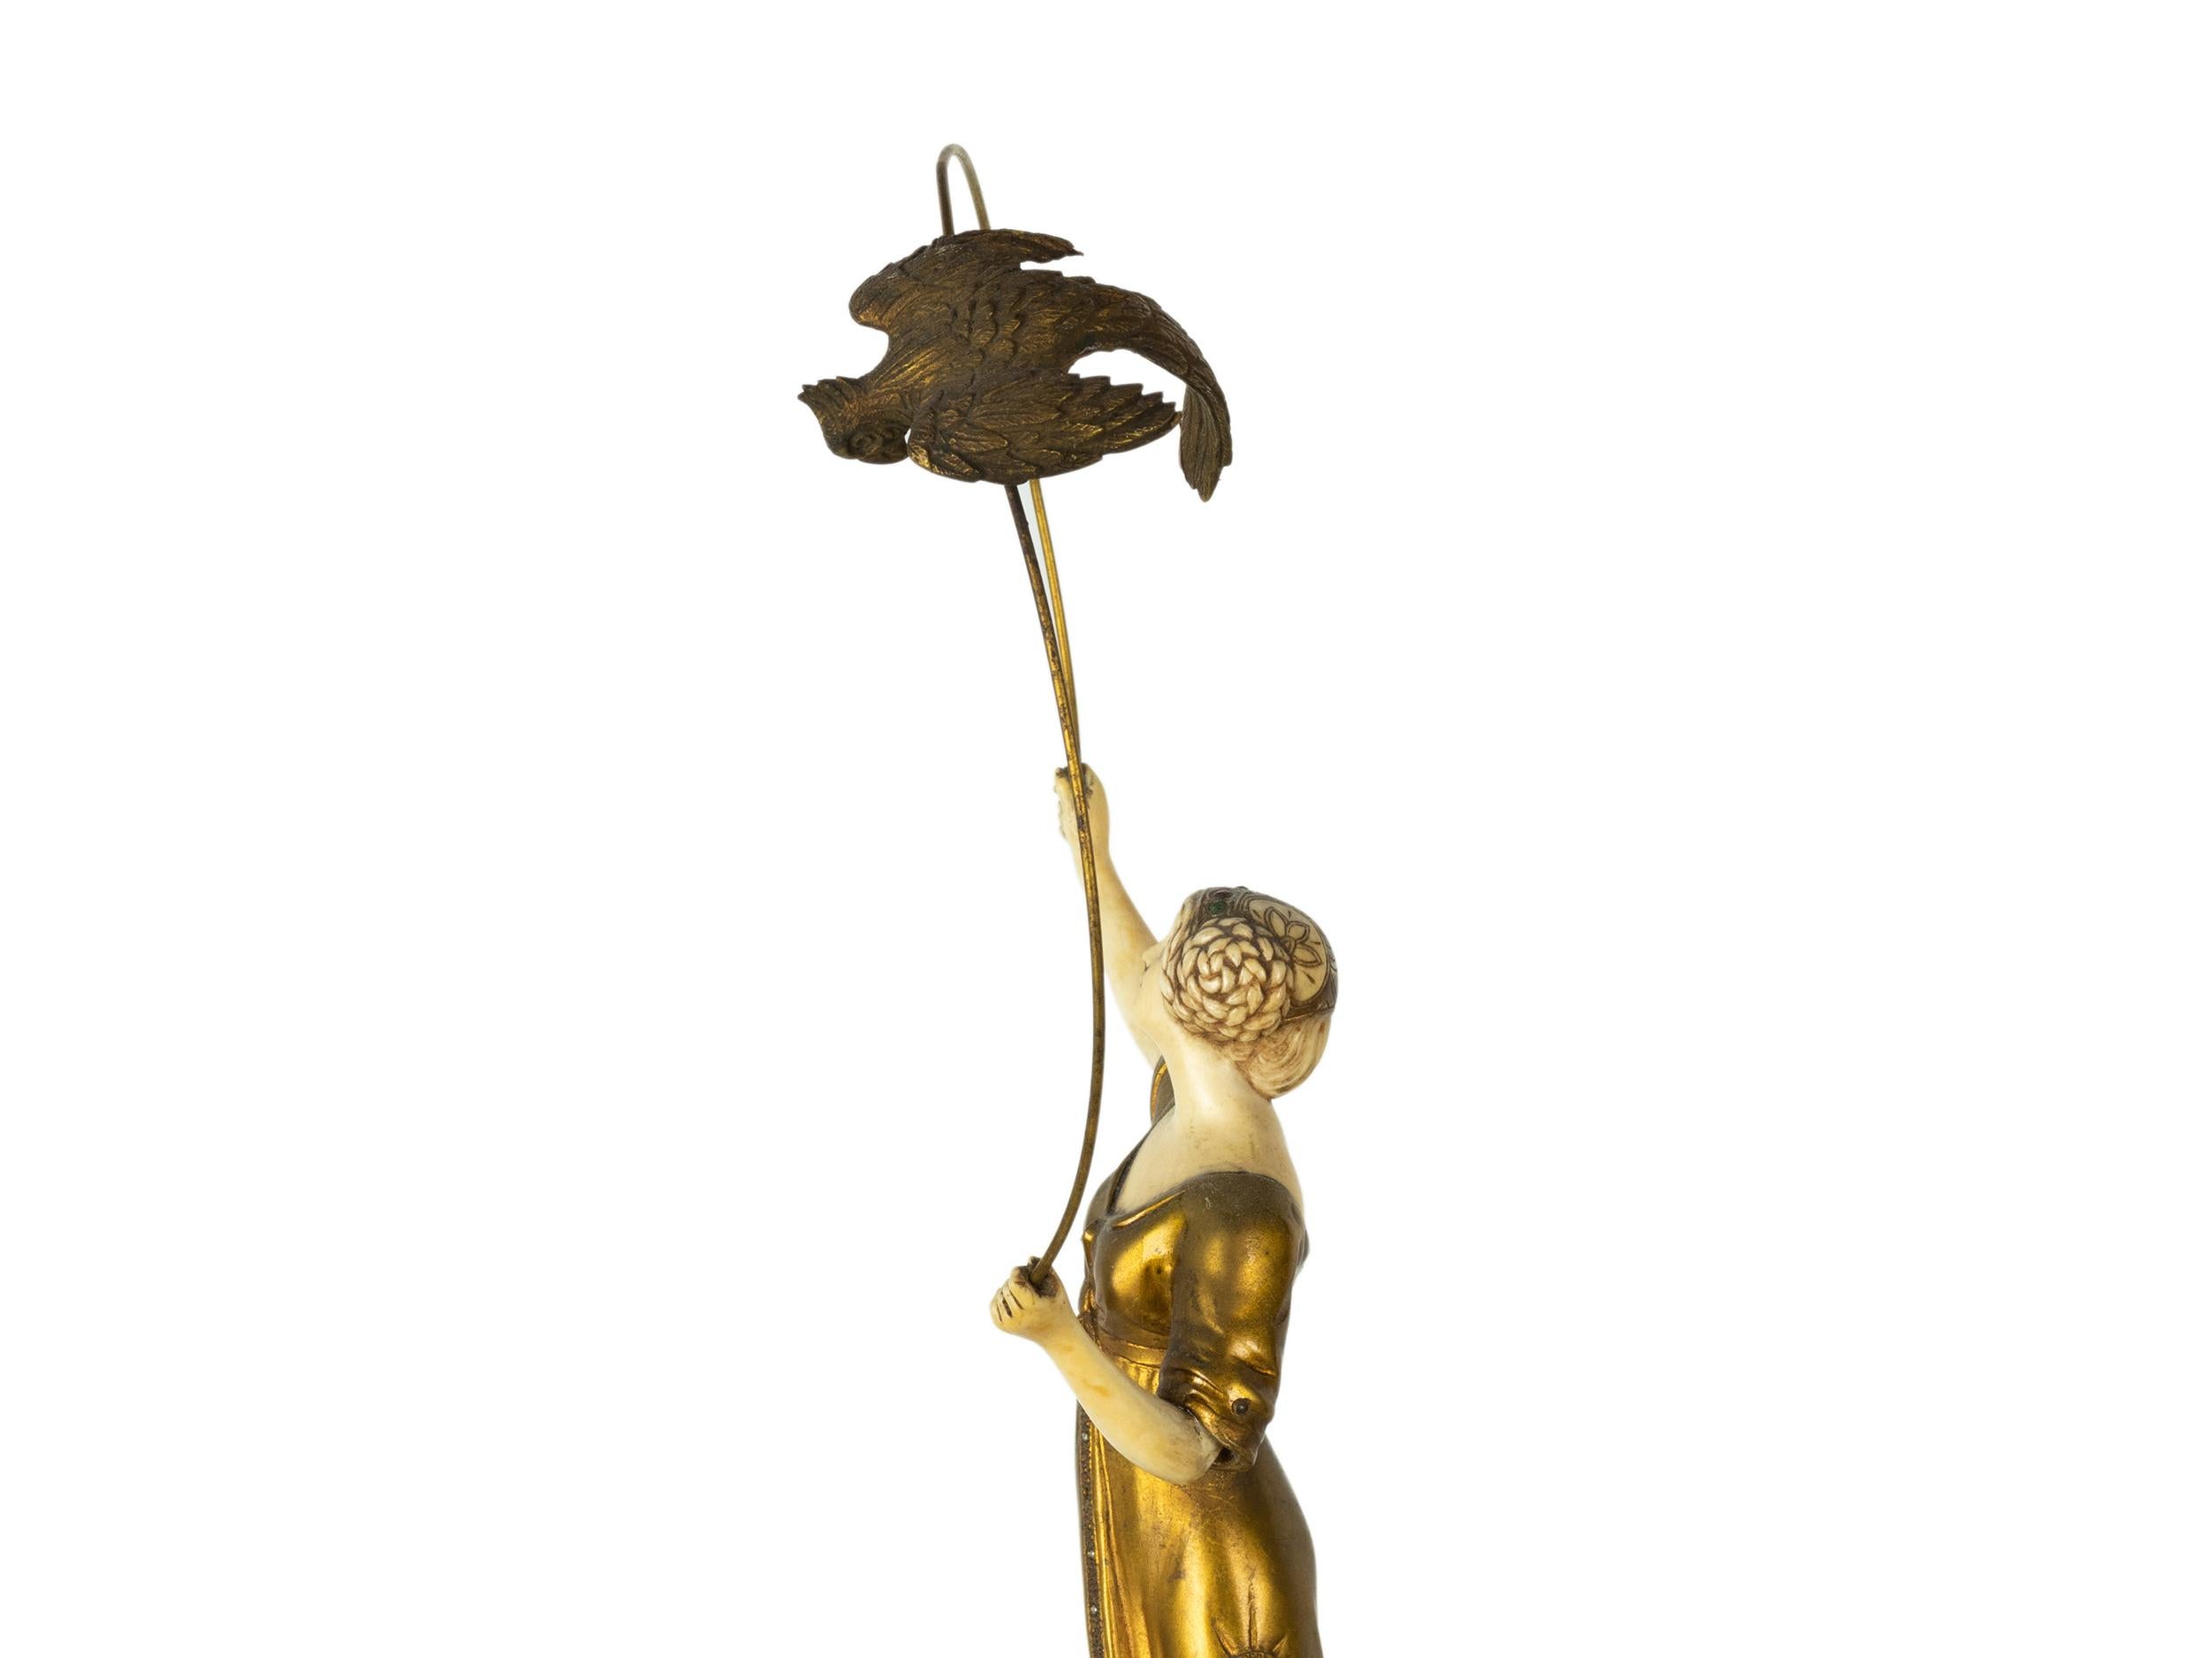 A very rare Hoop Dancer and Falcon in bronze, marble base and head and hands in ivory, dressed with a headband with shiny stones.
“Briand” signed (pseudonym of Marcel André Bouraine). 

Marcel Bouraine, in addition to being a grand Impressionist and